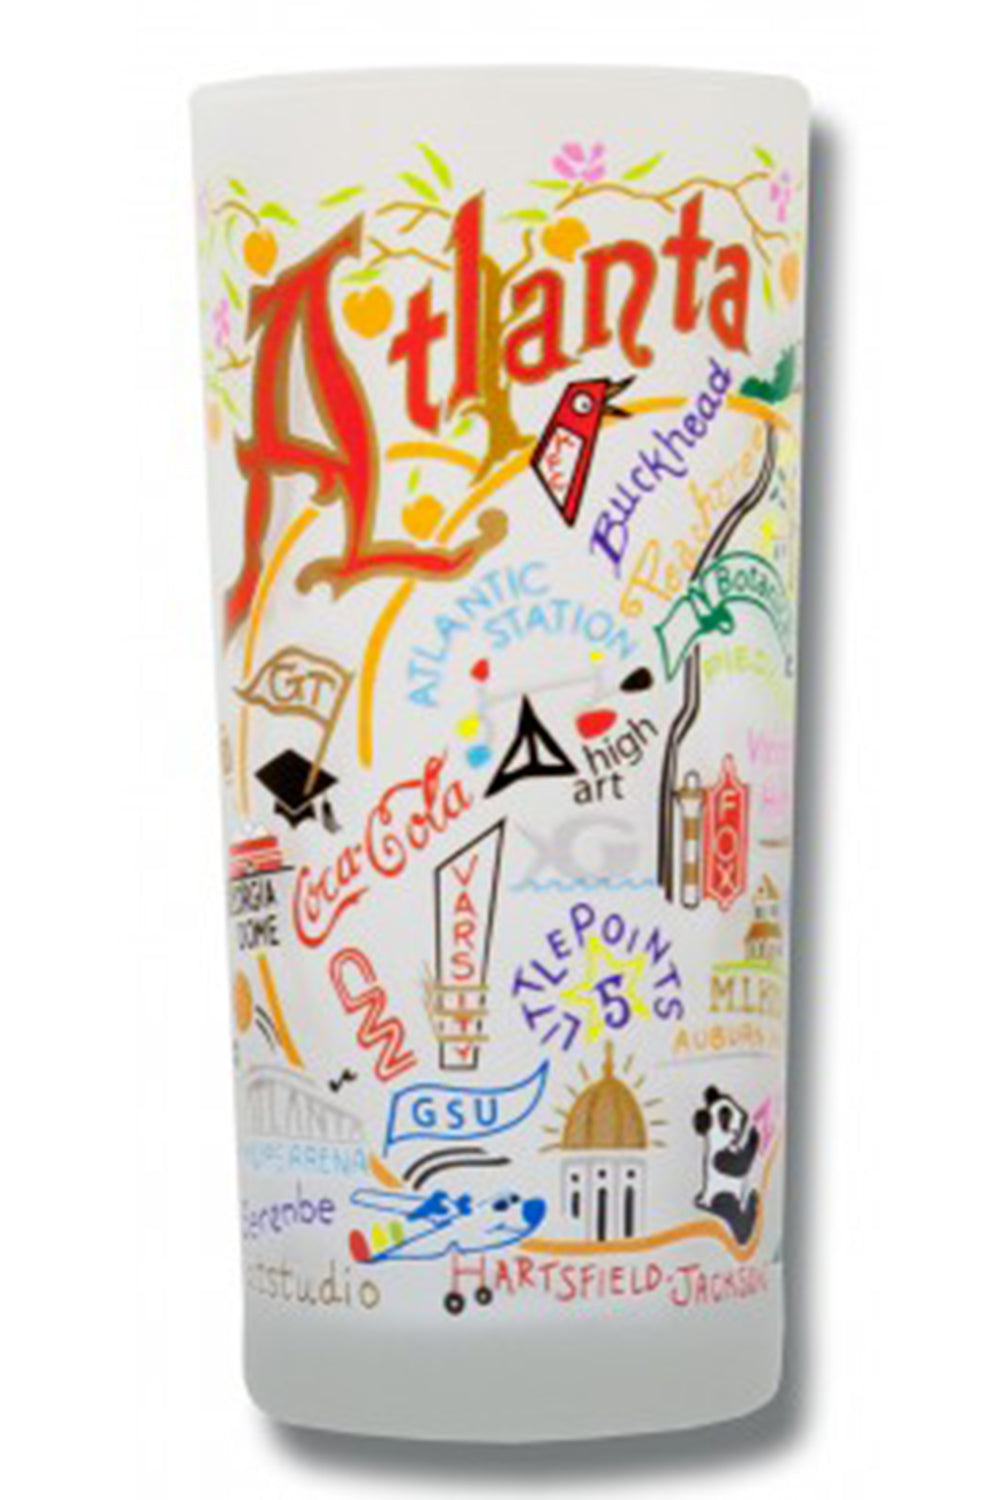 CS Frosted Glass Tumbler Cup - Atlanta